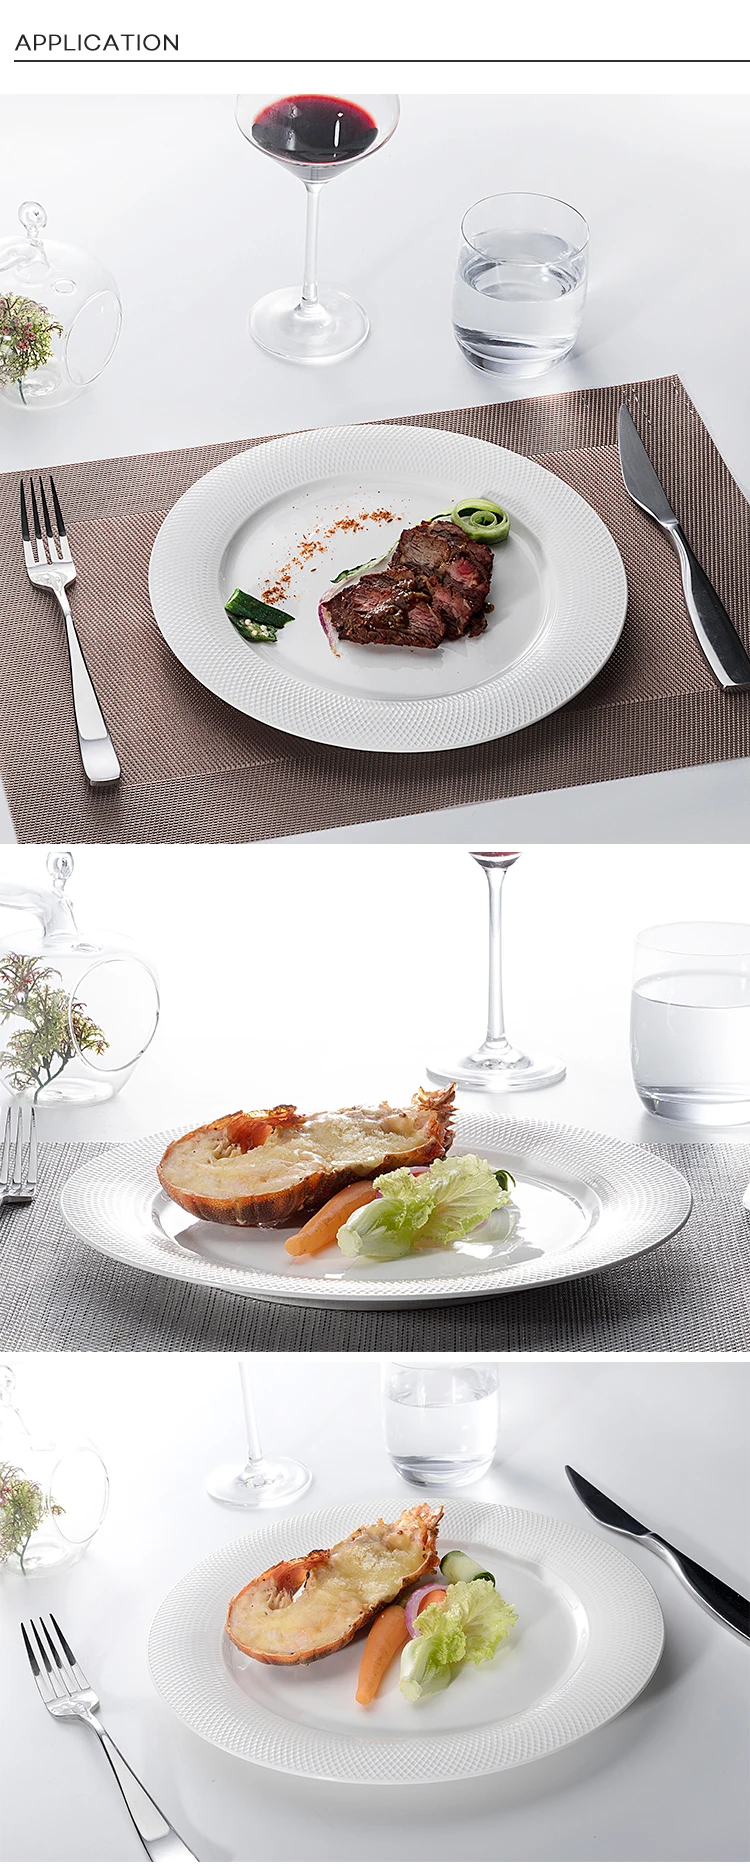 New Product Ideas 2019 Innovative for Hotels Marriott chinaware Beauty Dish, Grid Style Fine Dining Plates Flat Plate^